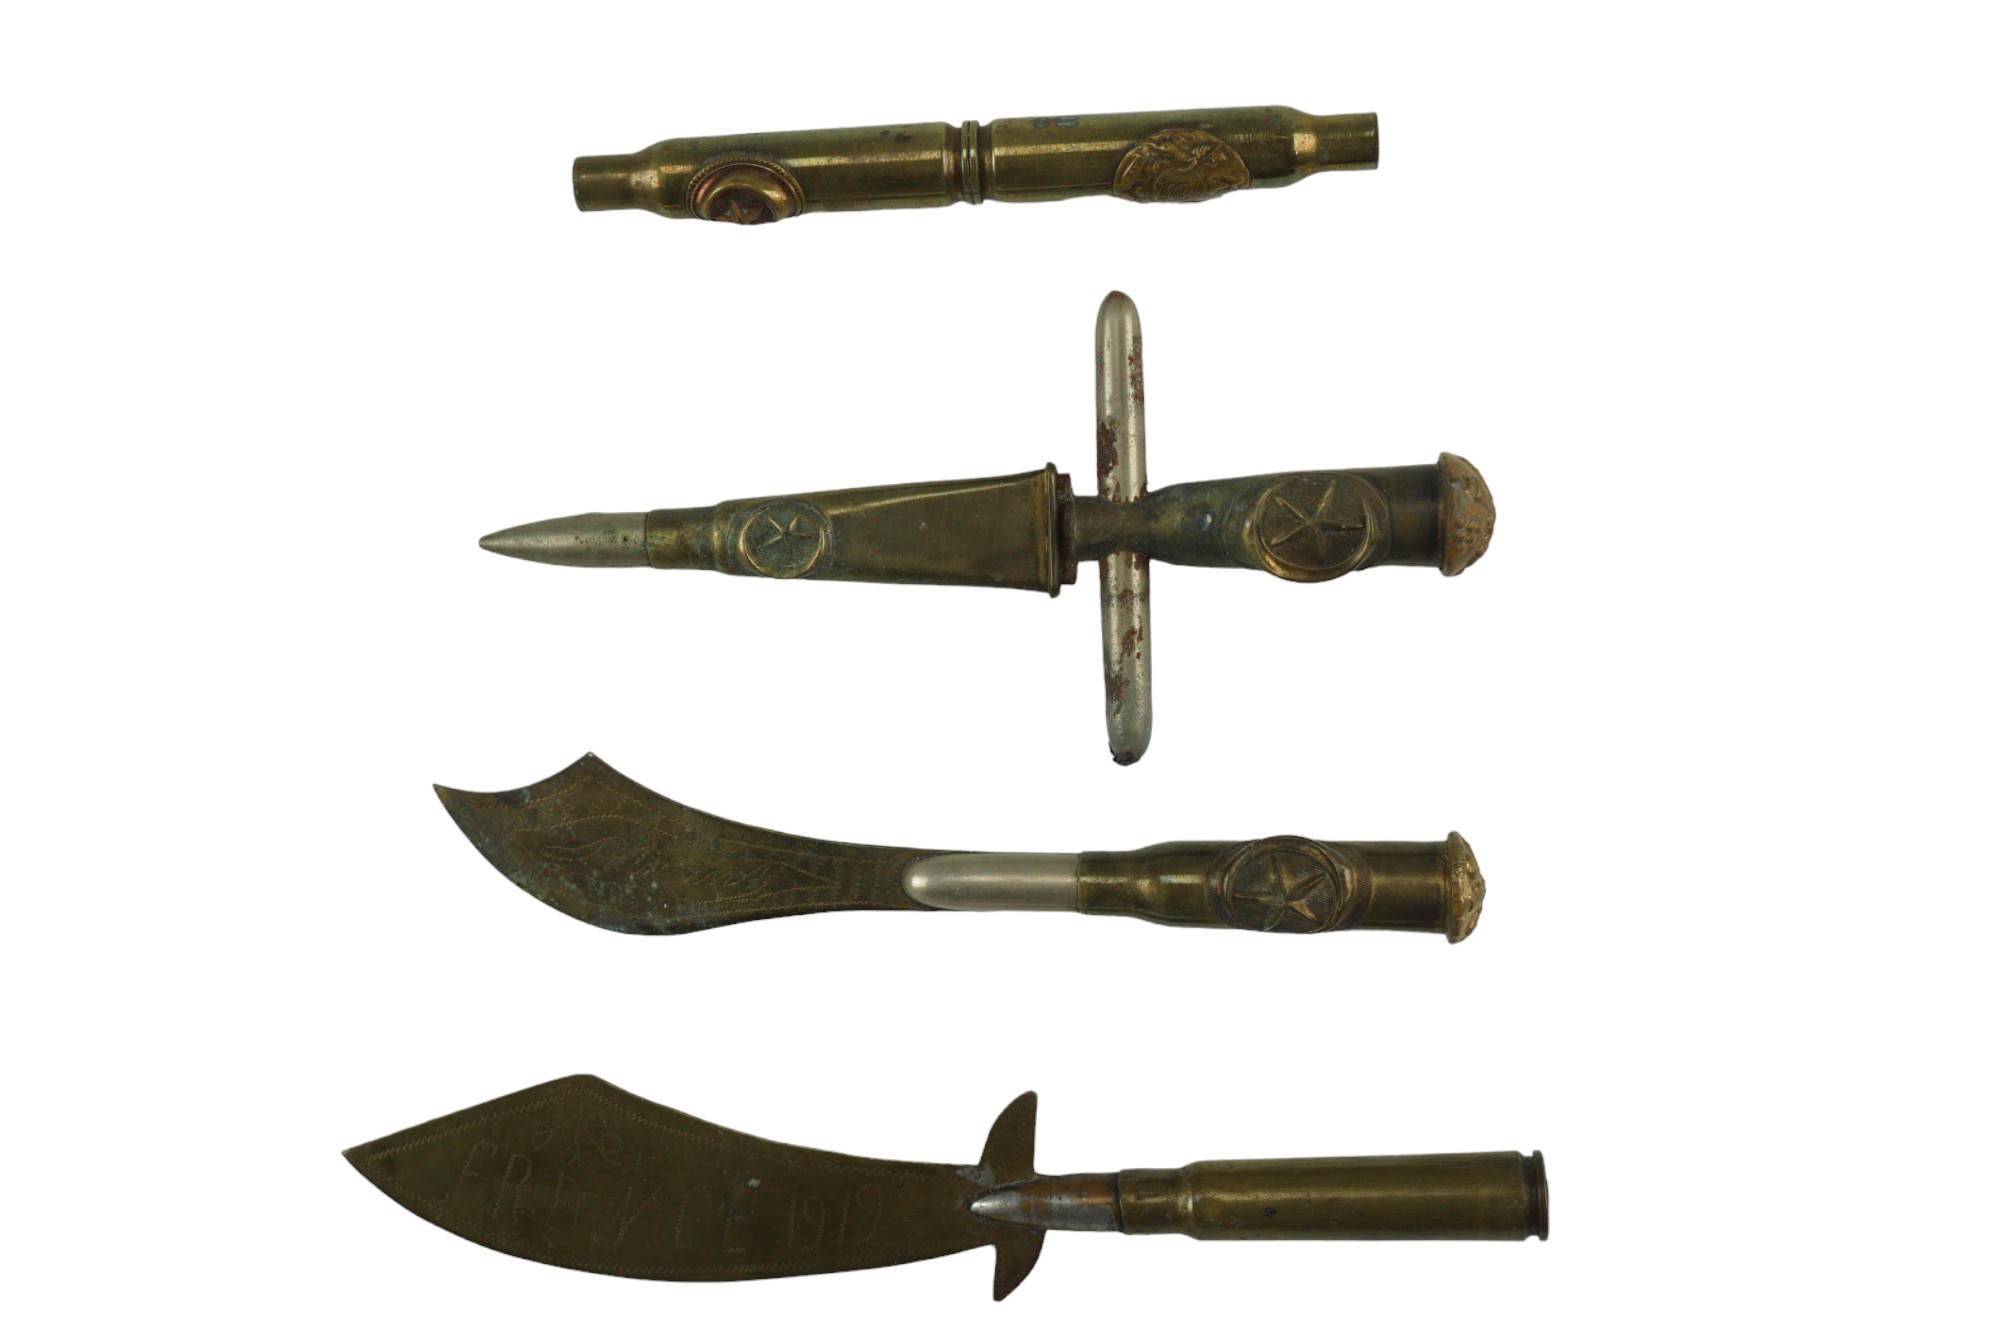 Three Great War trench art paper knives and one other related object, three incorporating Ottoman